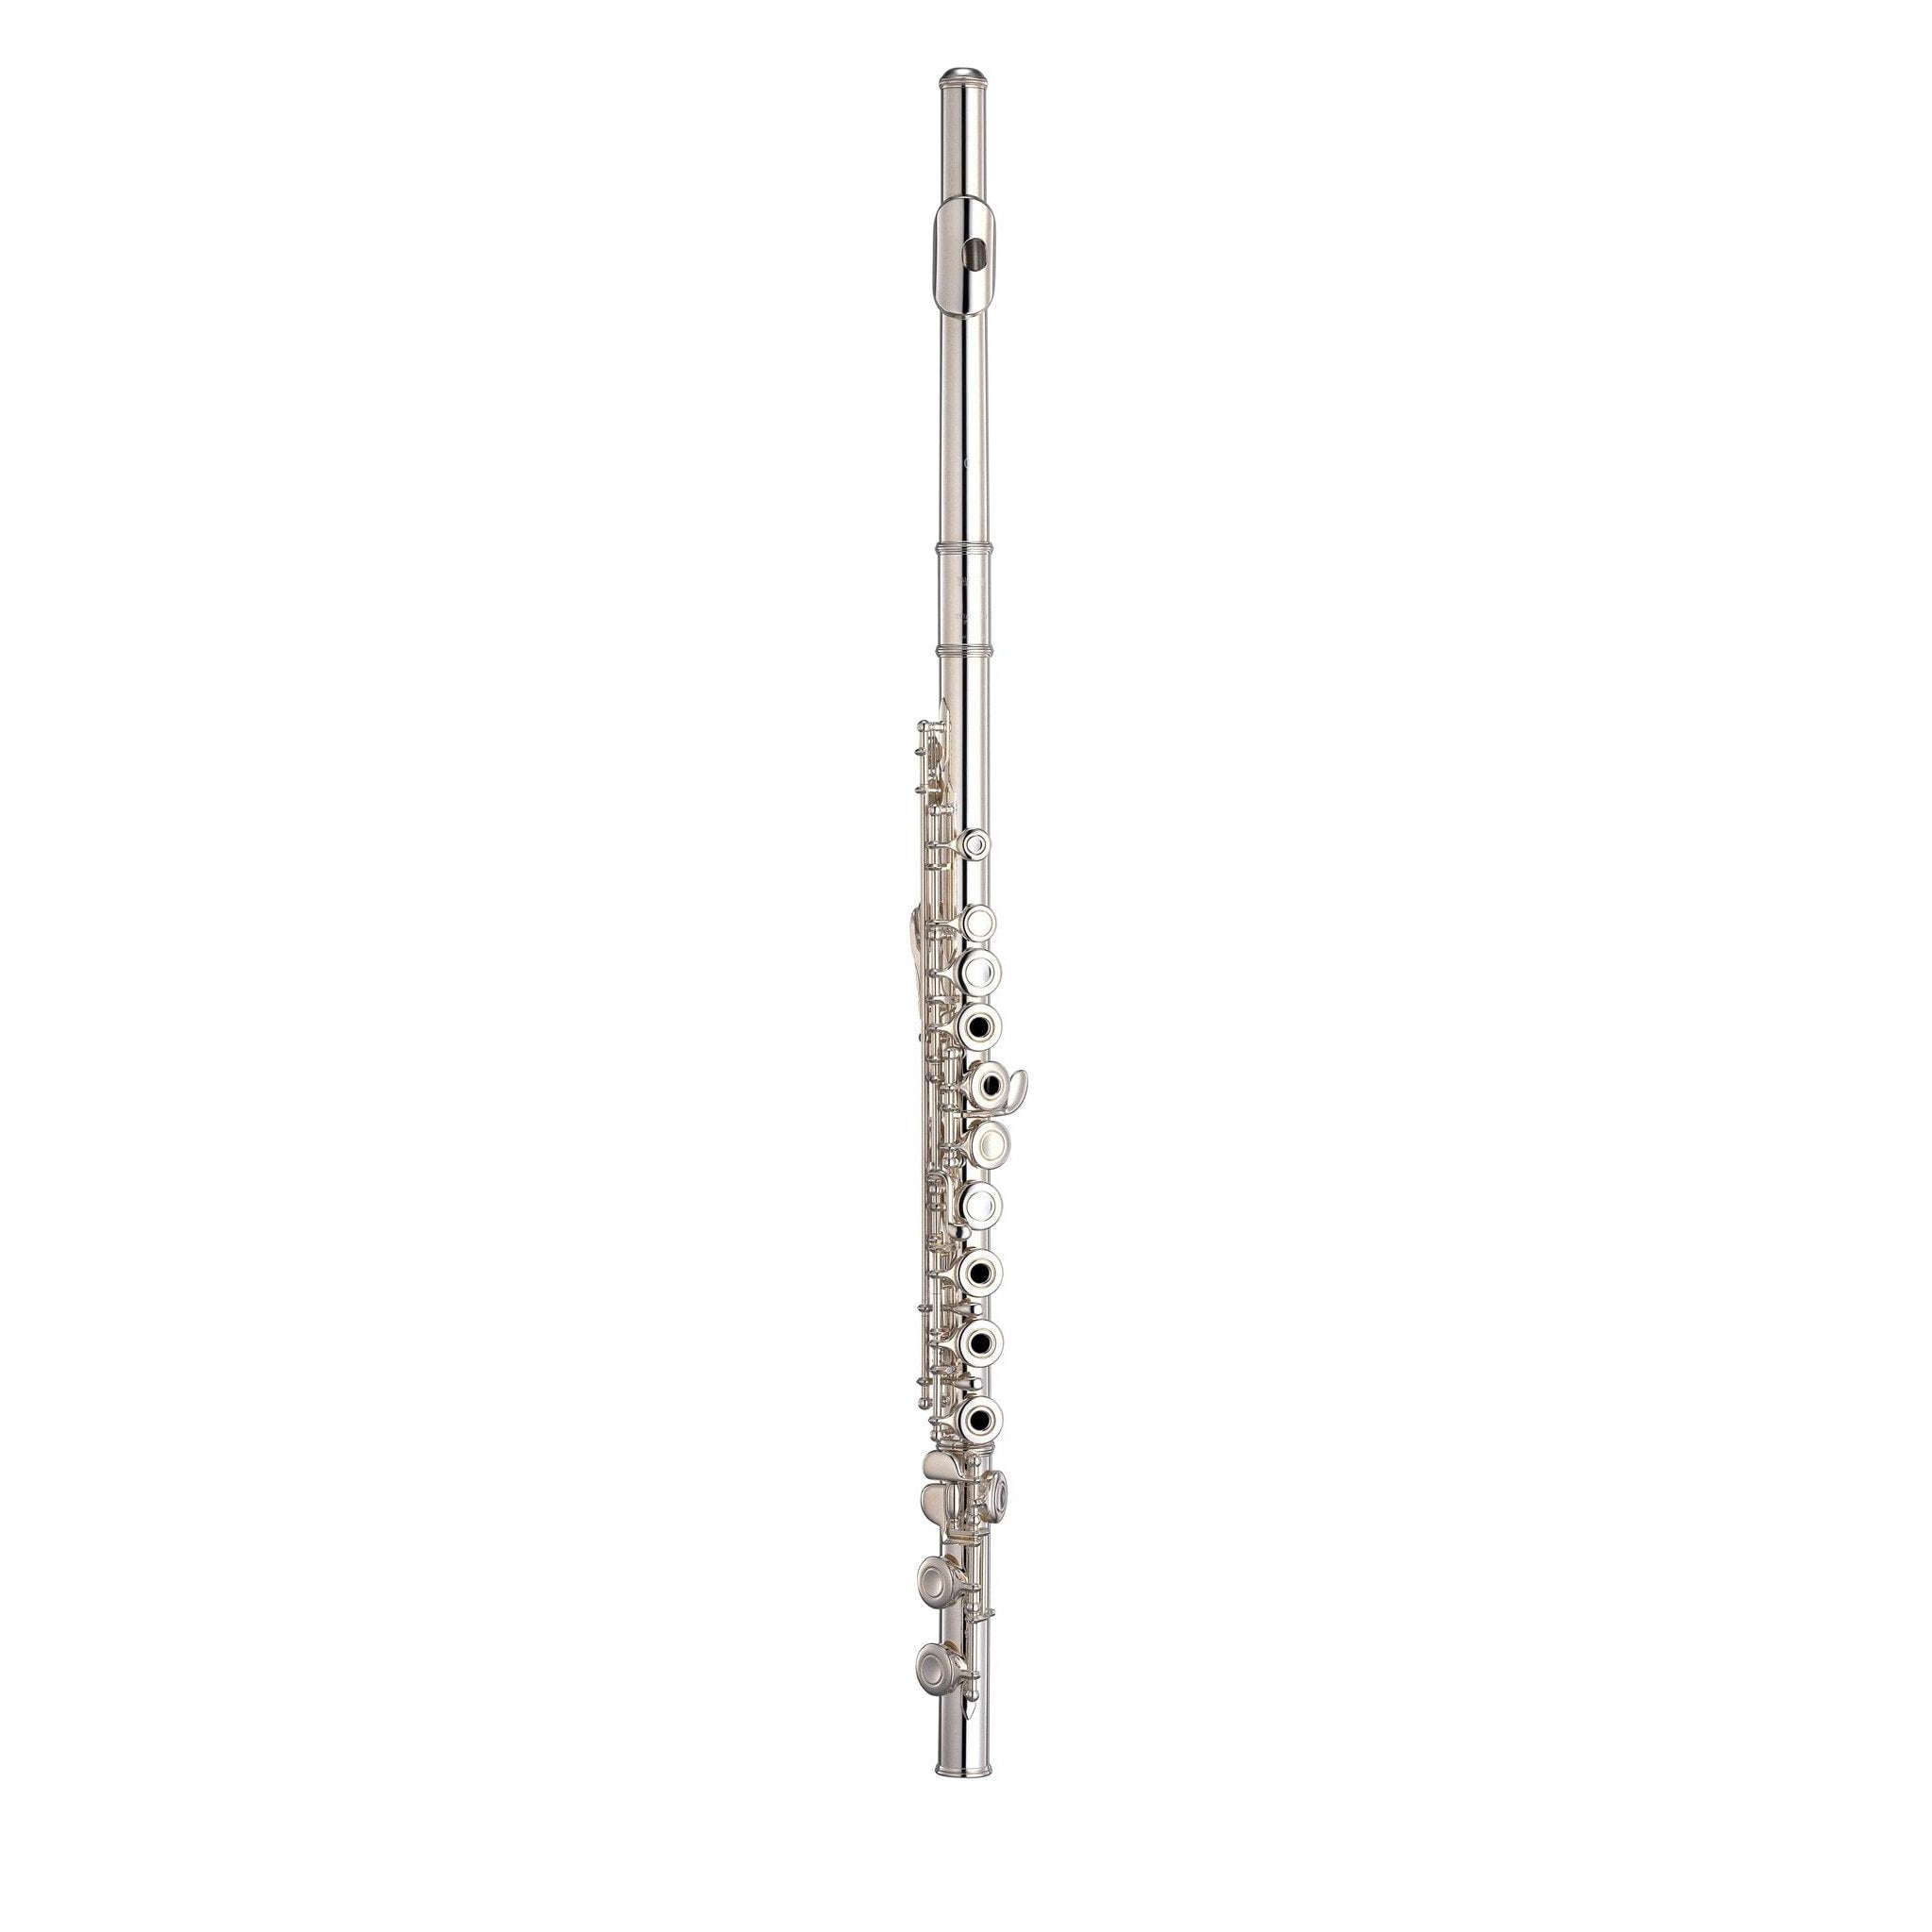 Yamaha YFL-362 Intermediate Series Flute YFL-362H - Includes B Footjoint with Gizmo Key and FLC-190H Case